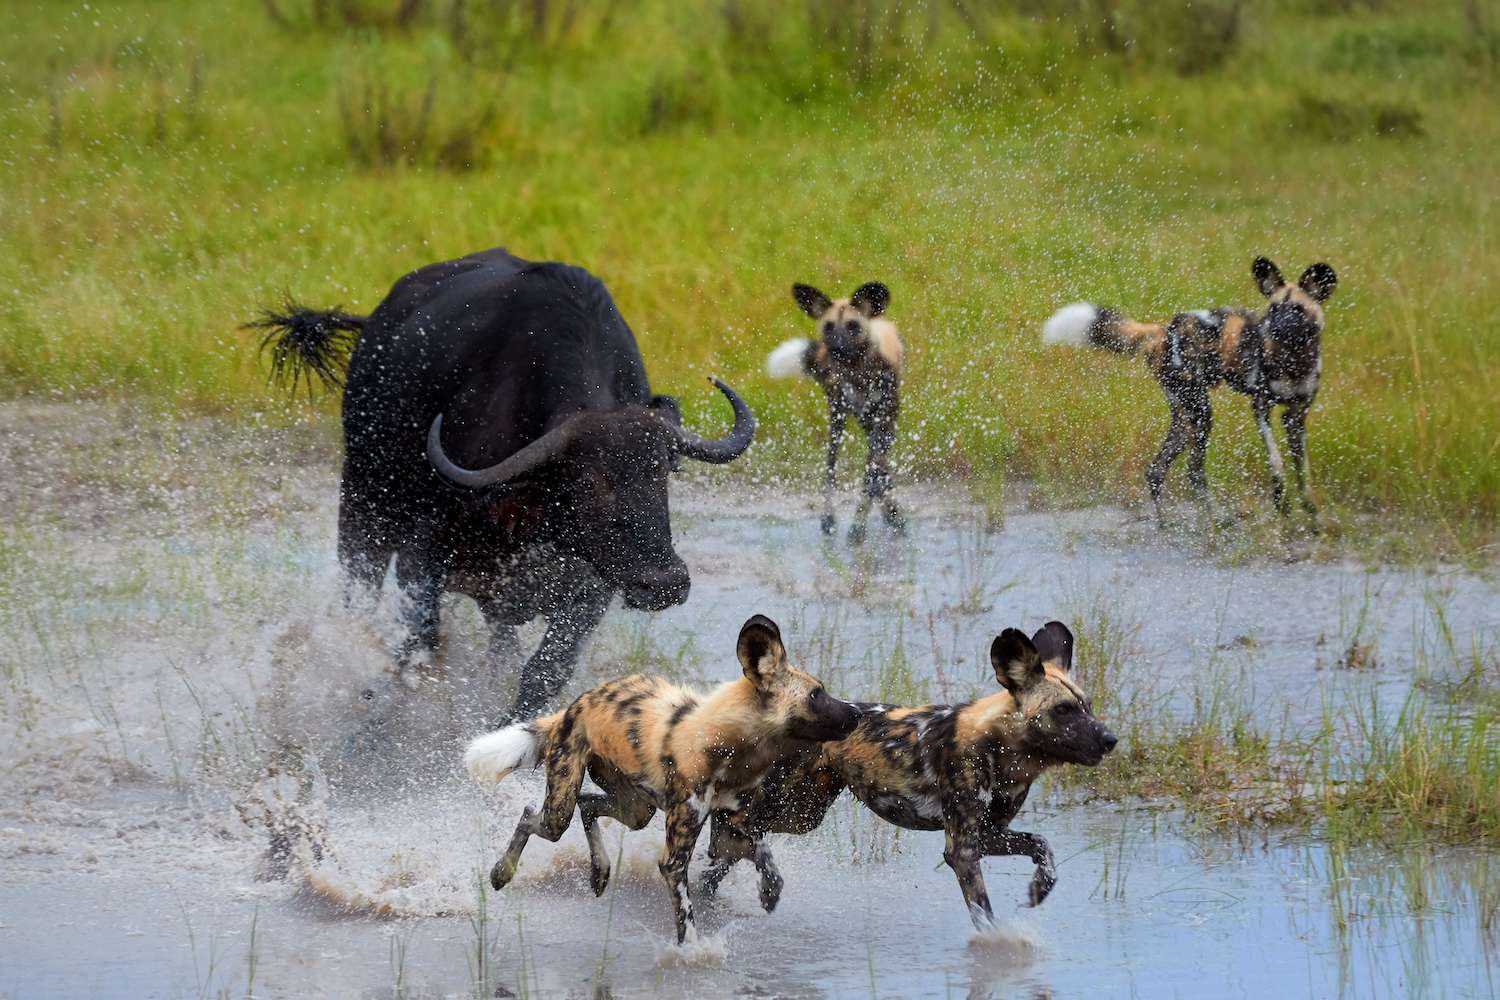 African Wild Dog, Lycaon pictus, pack attacking buffalo calf in water, defended by mother. African wildlife photography. Self drive safari, Moremi, Okavango delta, Botswana.